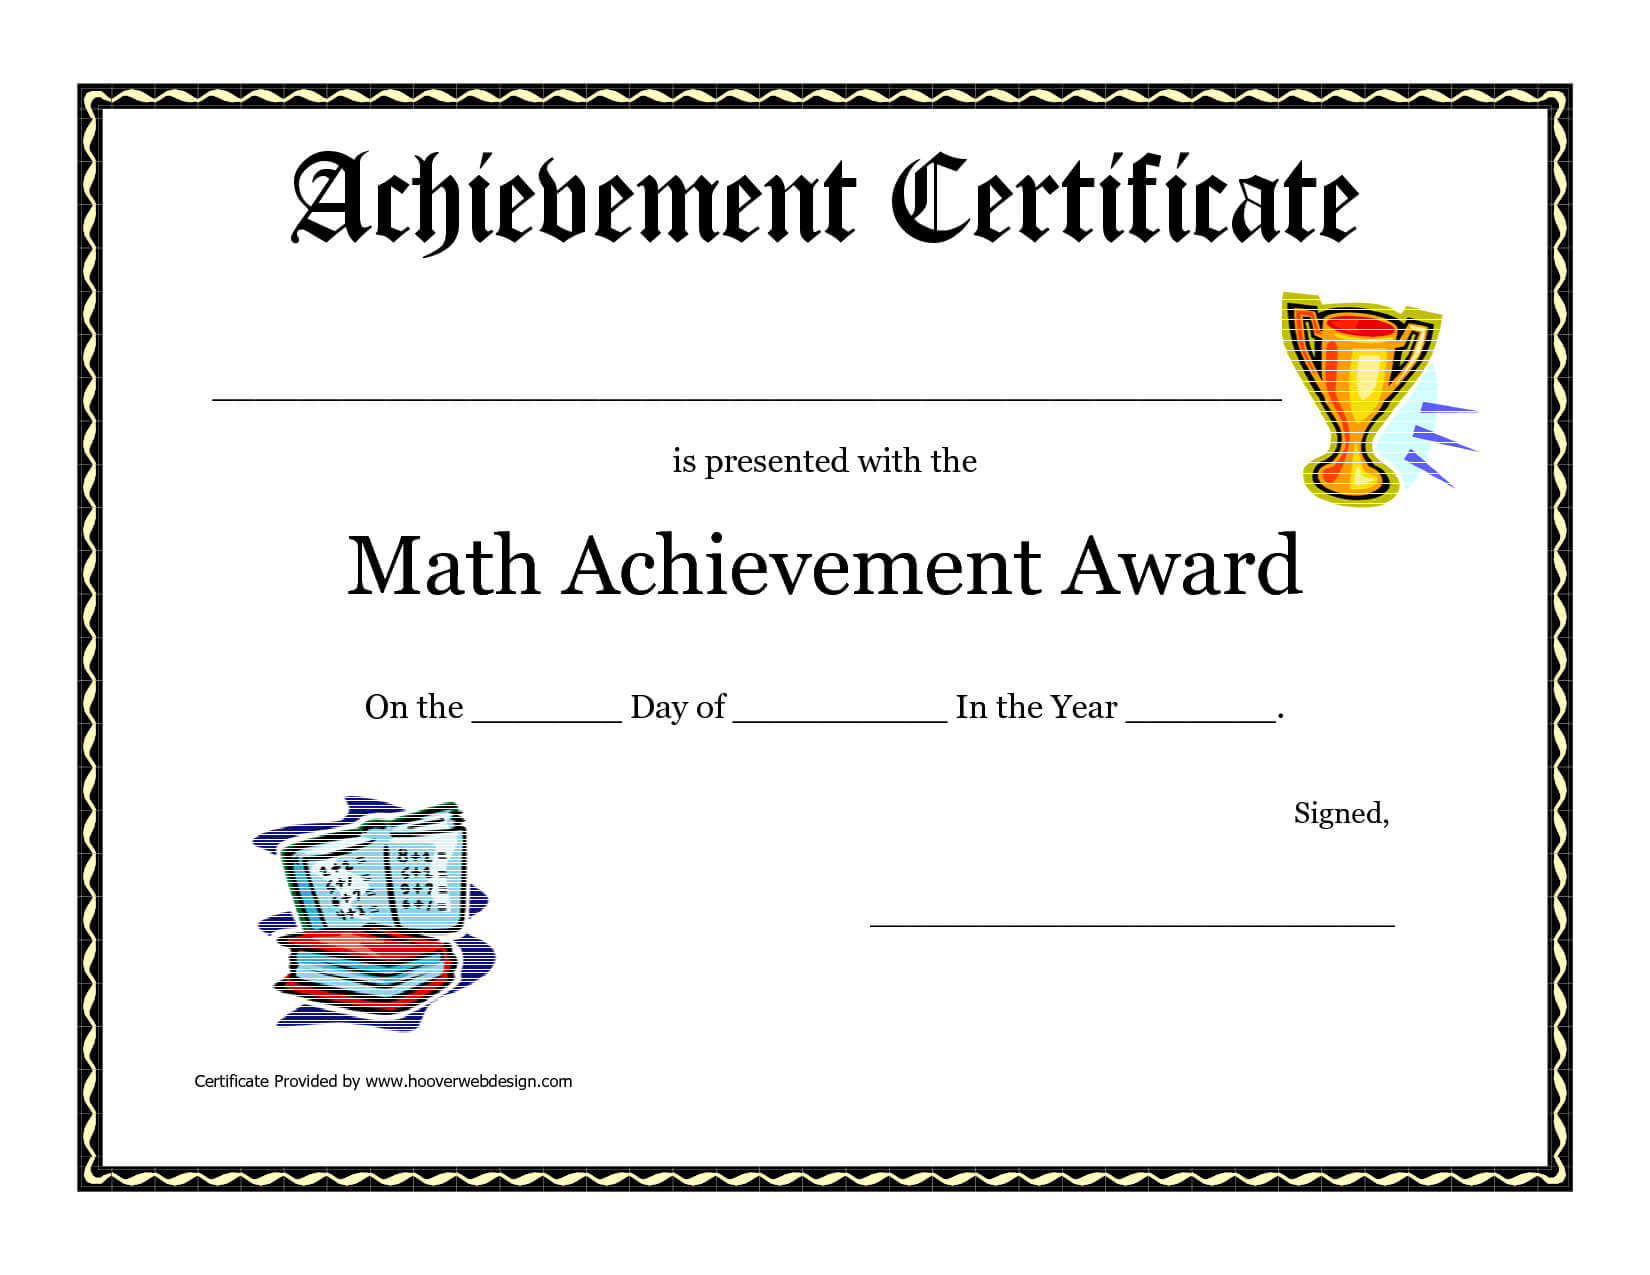 Math Achievement Award Printable Certificate Pdf | Award With Regard To Hayes Certificate Templates